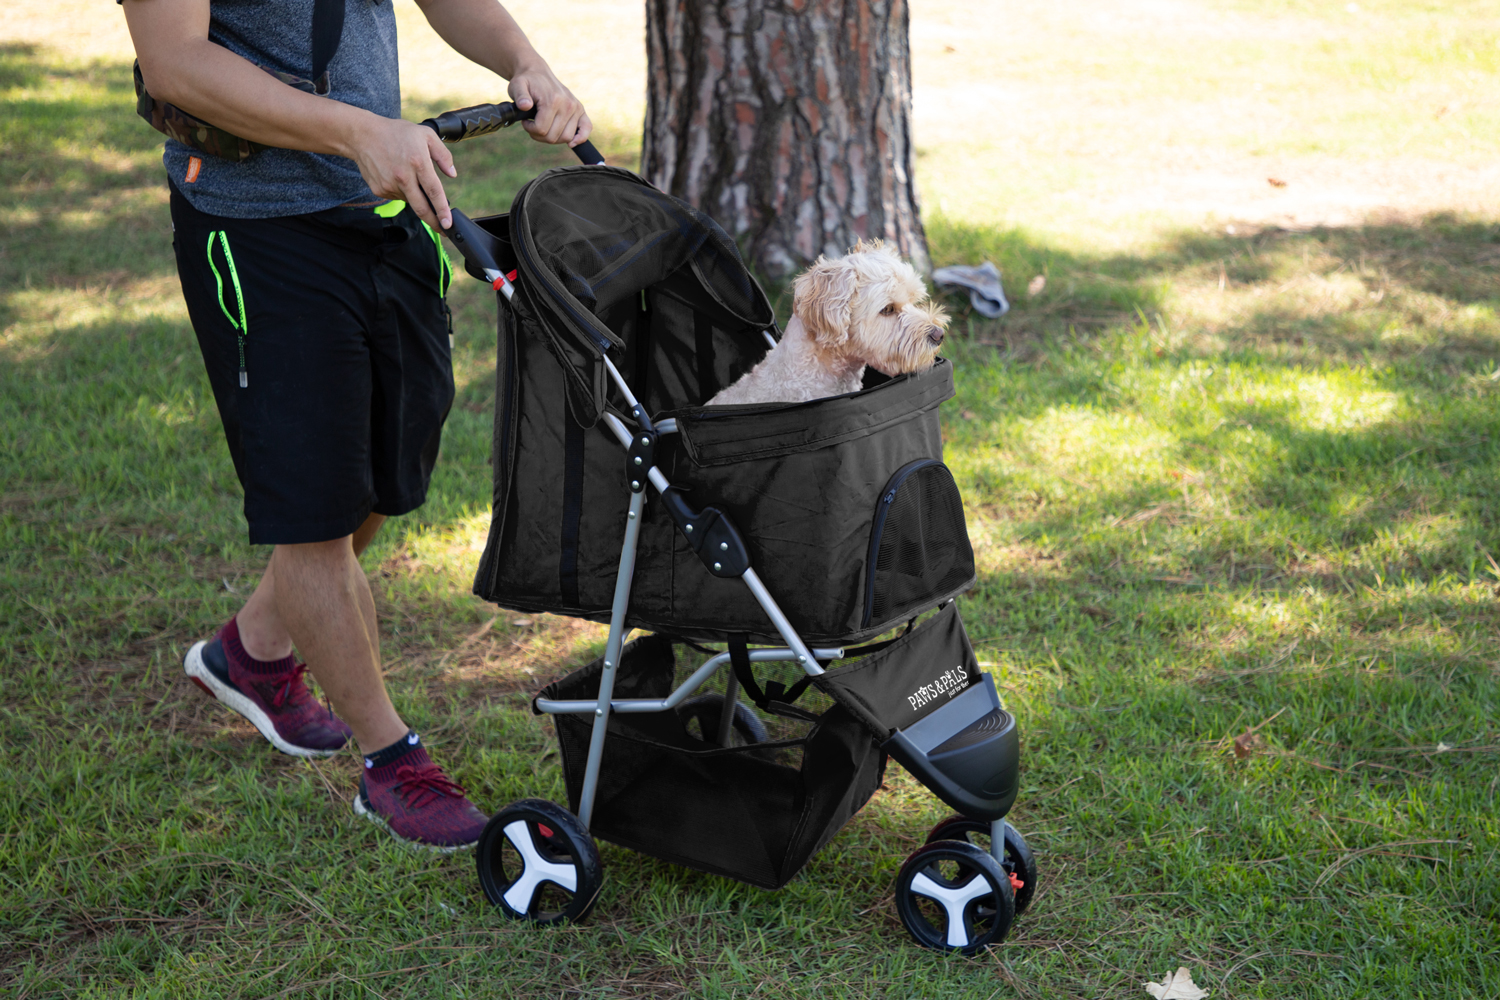 Paws & Pals Pet Stroller for Cats & Dogs Folding 3-Wheel Carrier Jogger (Black) (Small) - image 2 of 3